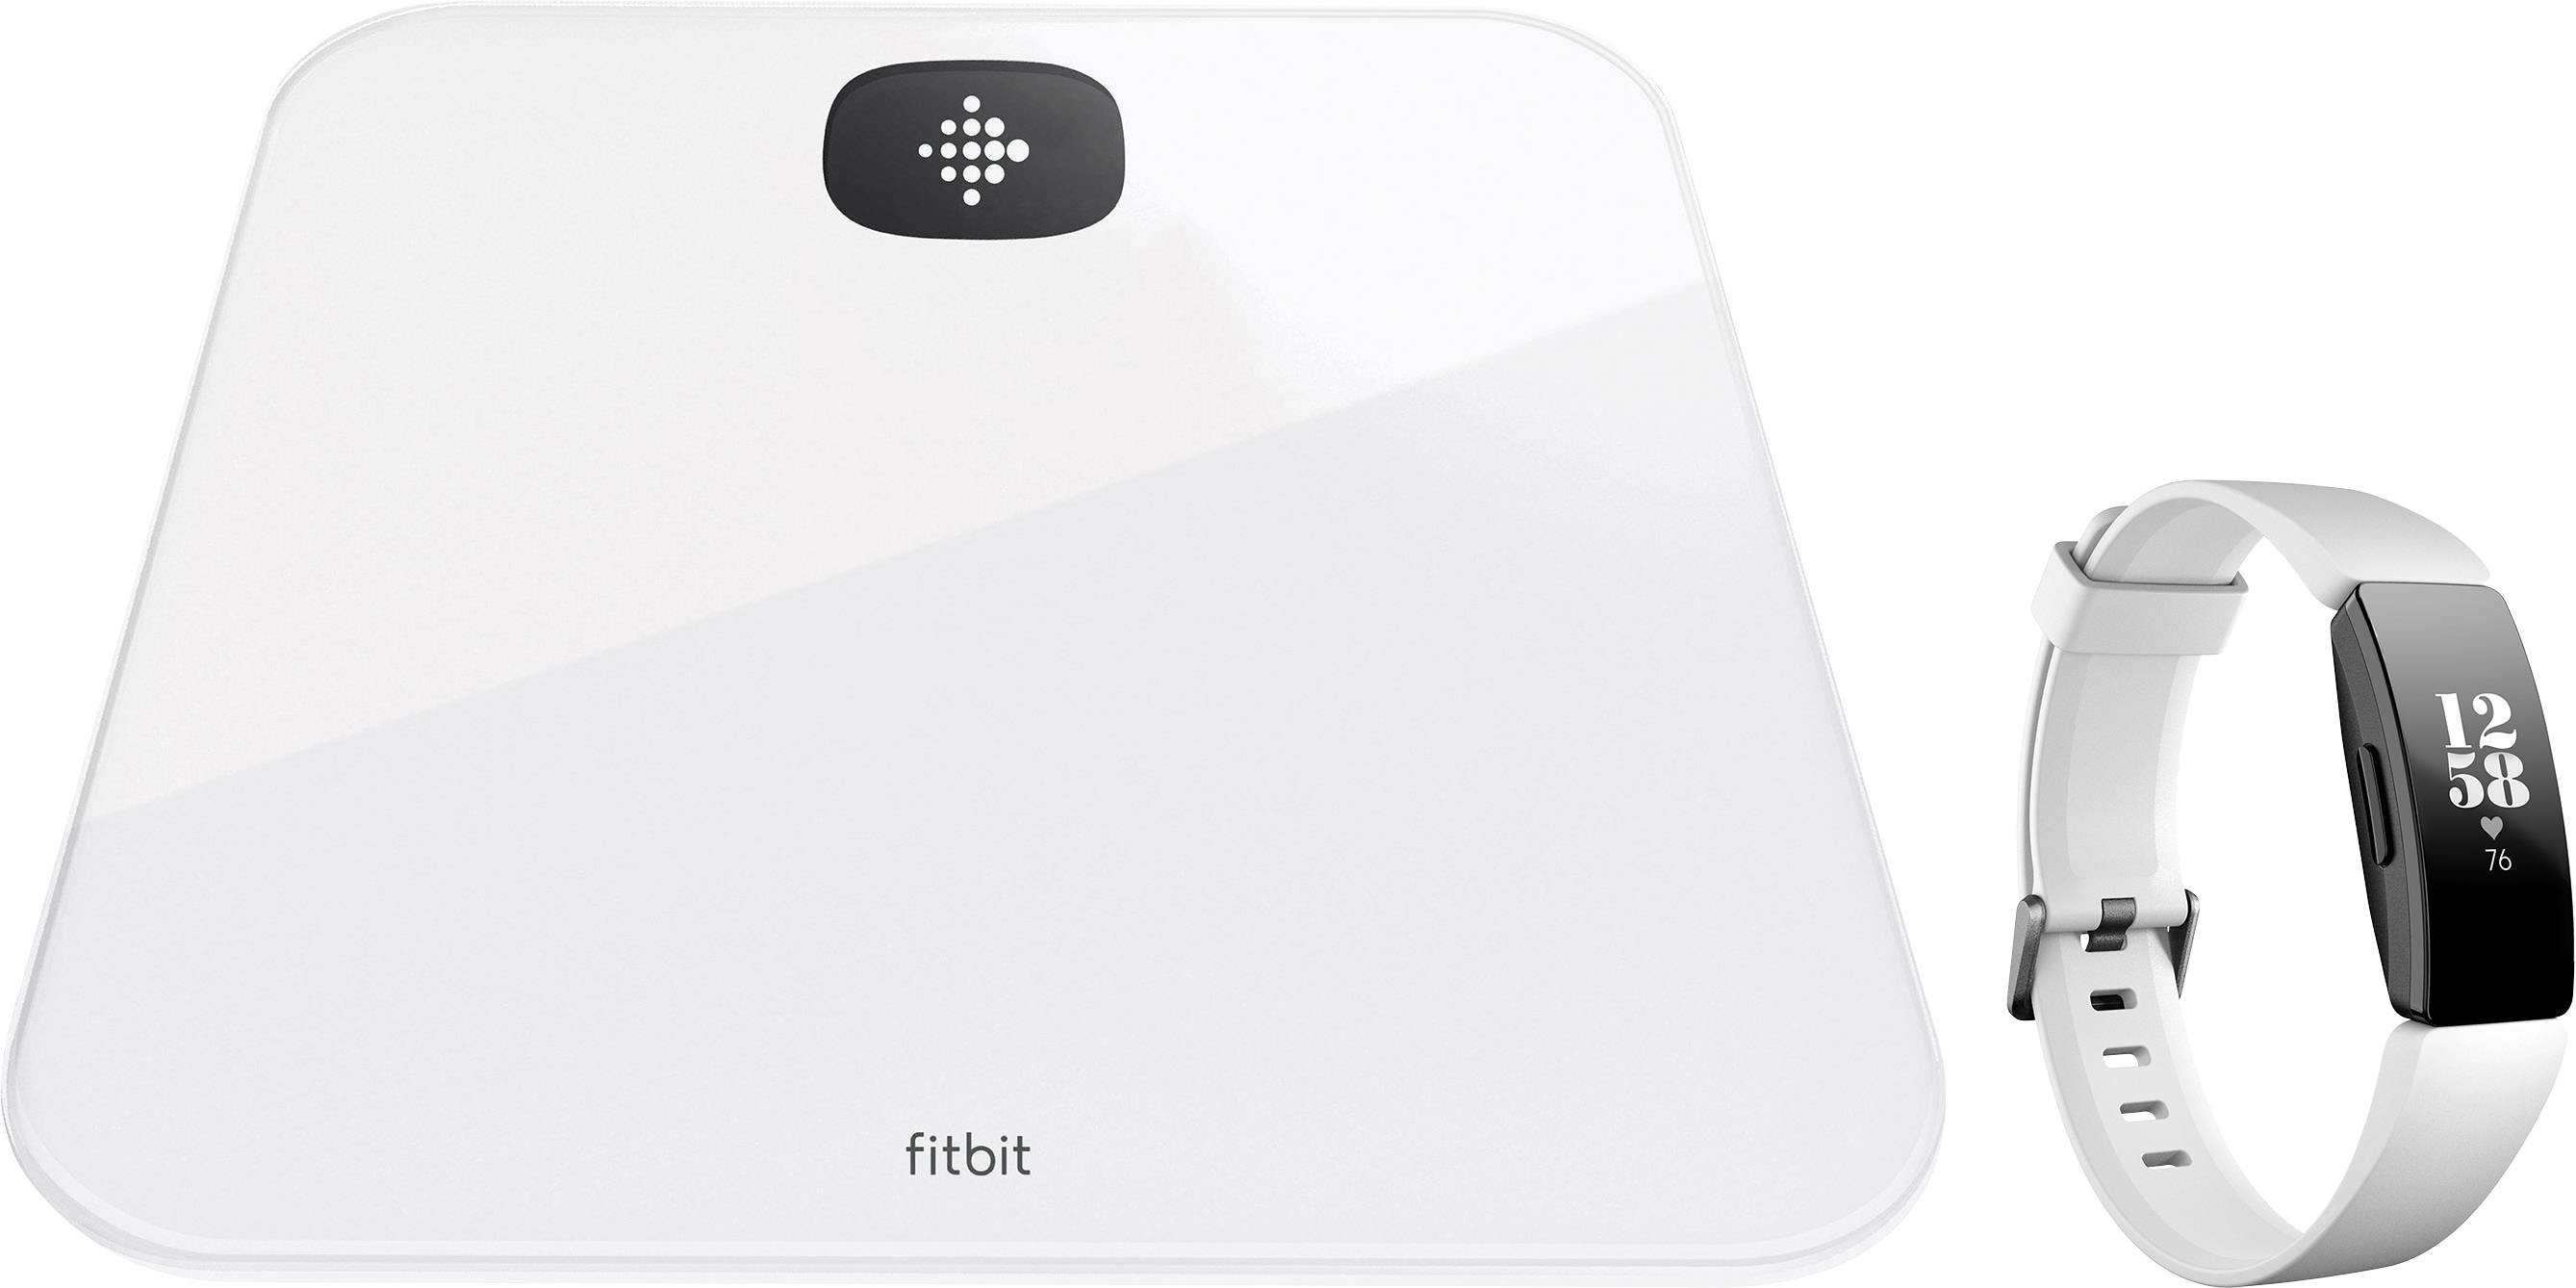 fitbit aria air max weight